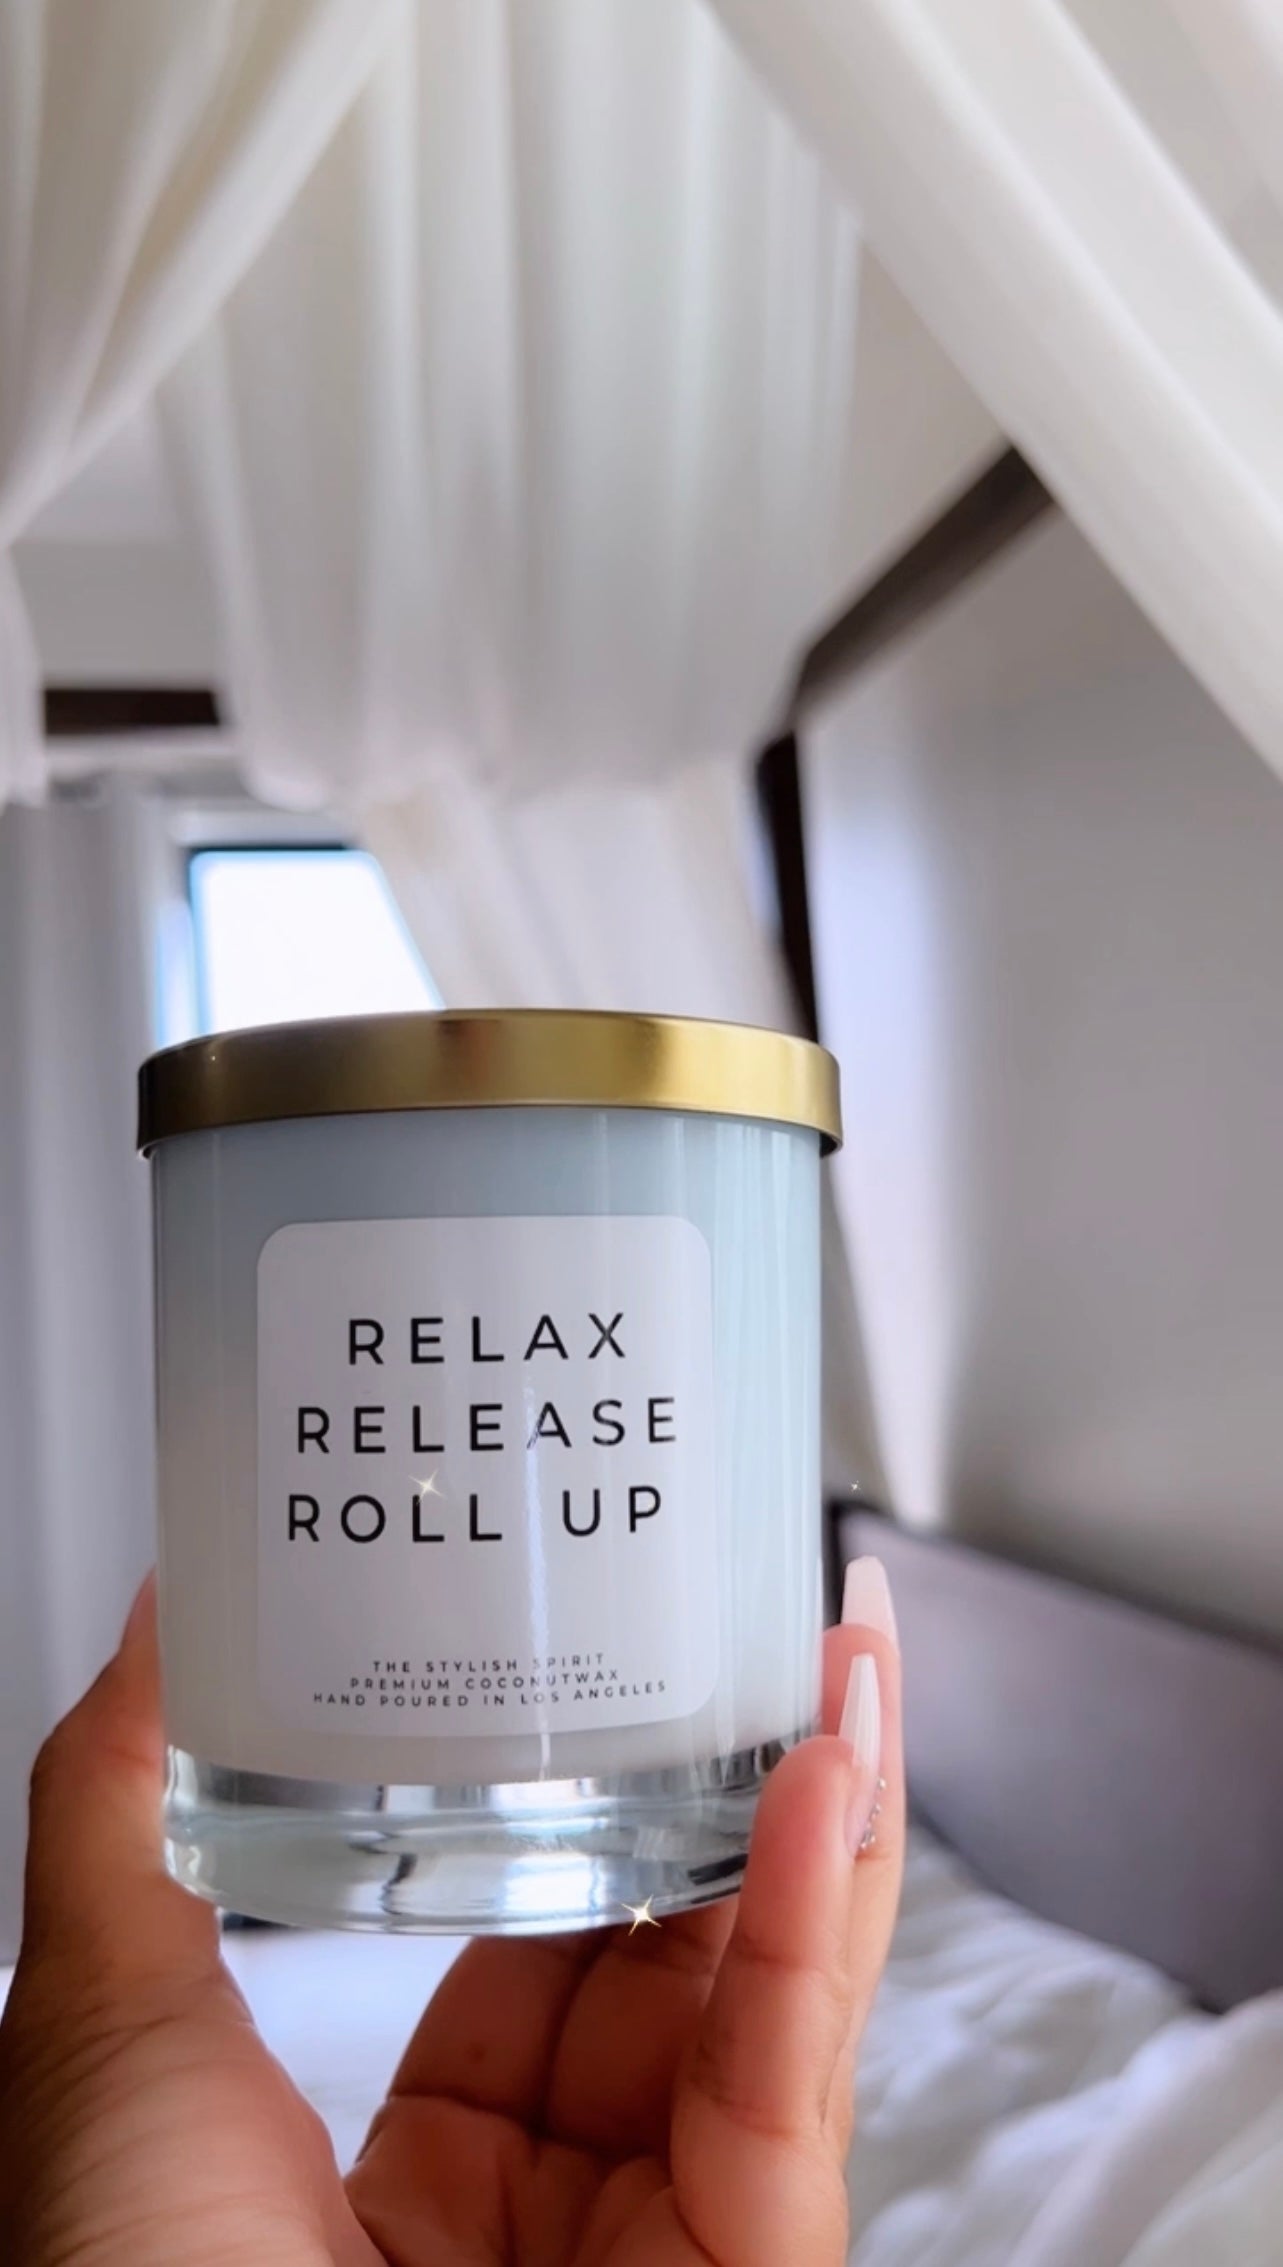 Relax Release Roll-up Candle